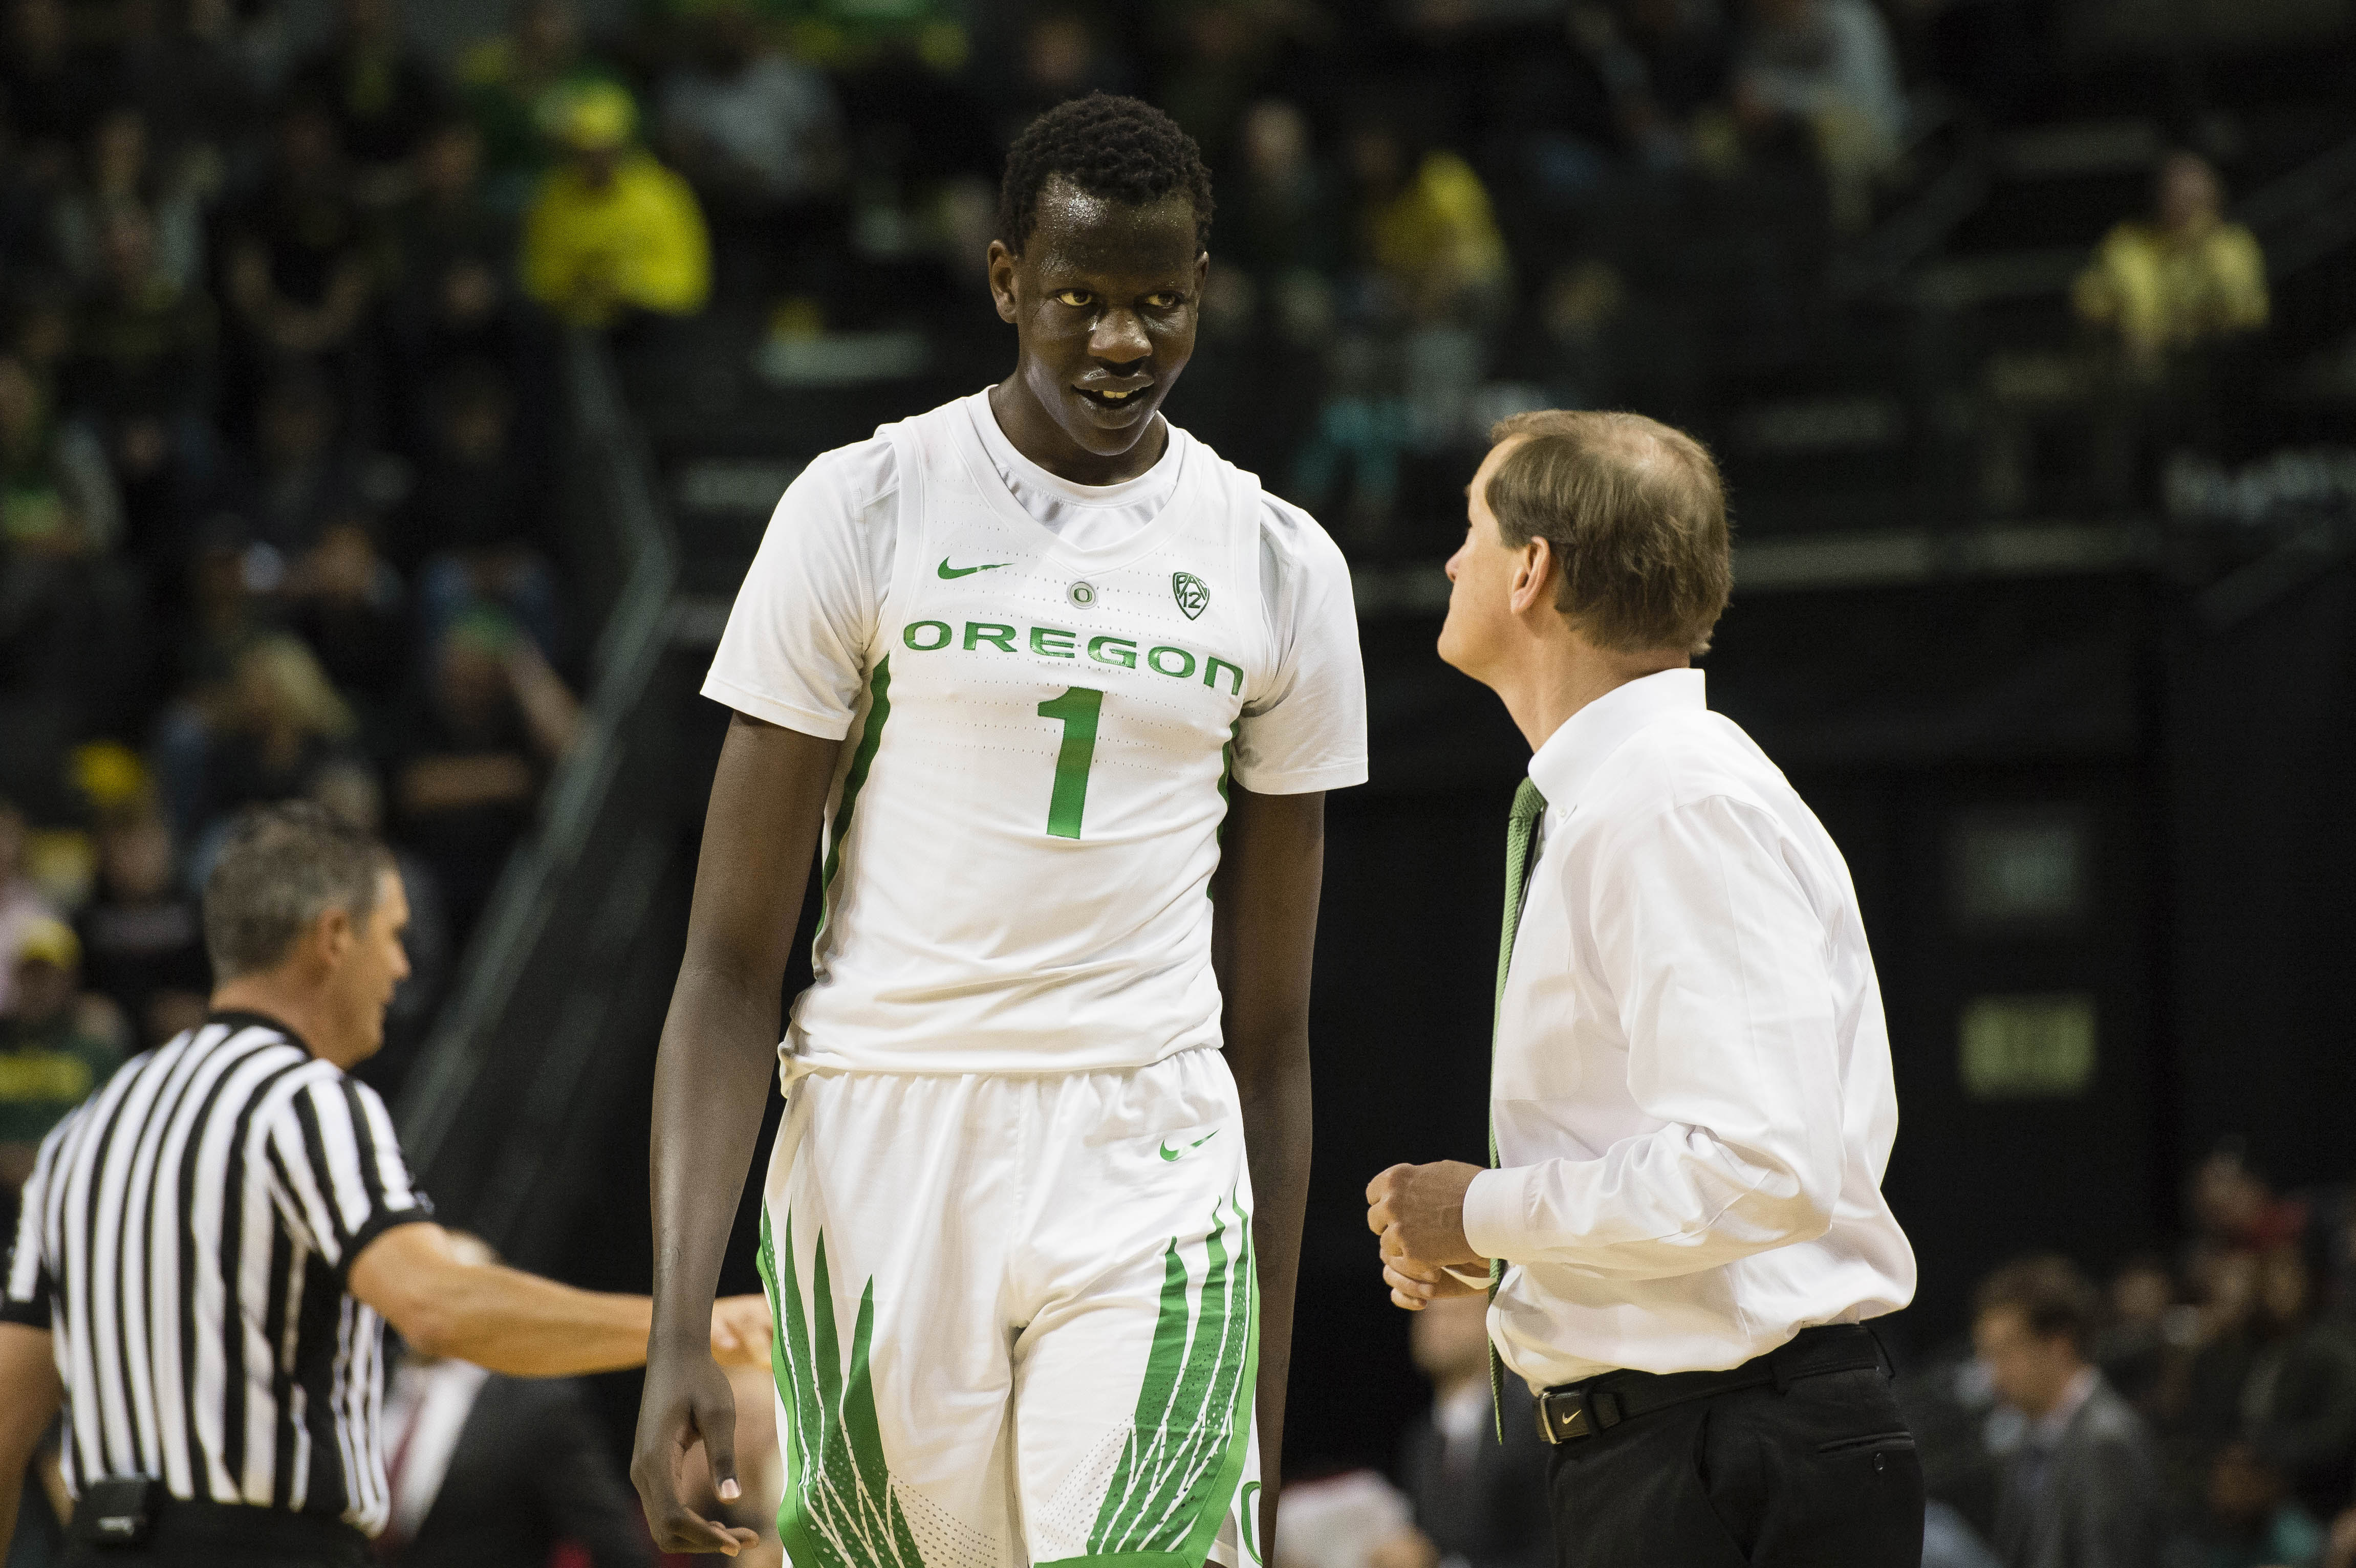 Oregon Ducks center Bol Bol (1) walks off the court after getting called for a technical foul during the second half against Eastern Washington Eagles at Matthew Knight Arena. The Ducks beat the Eagles 81-47.